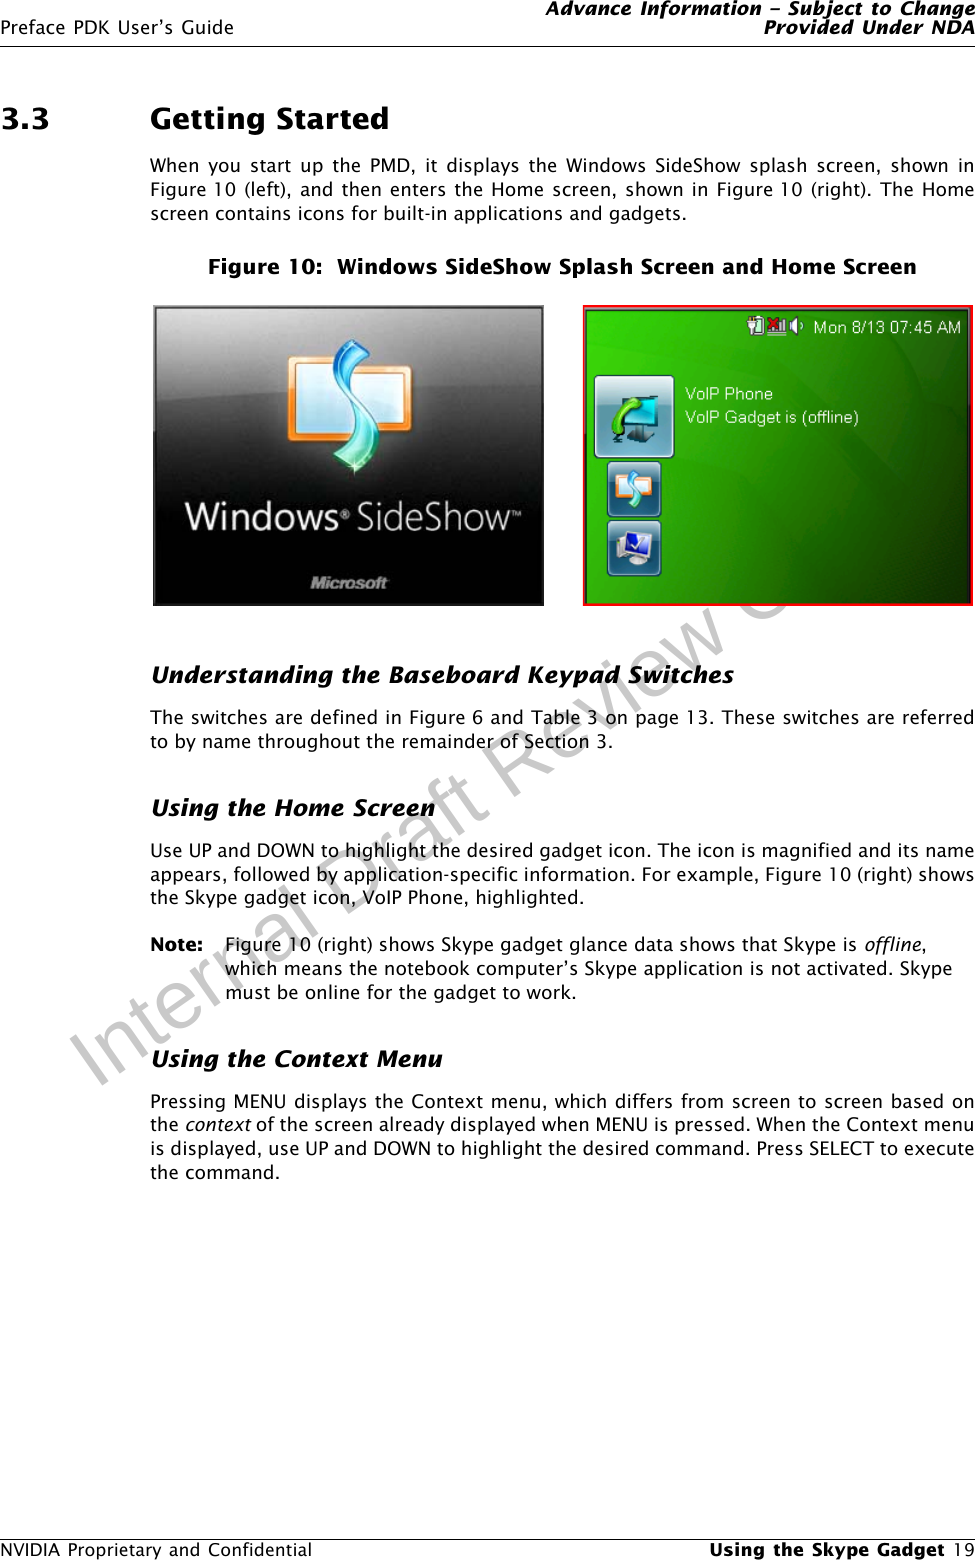 Advance Information – Subject to ChangePreface PDK User’s Guide Provided Under NDANVIDIA Proprietary and Confidential  Using the Skype Gadget 19Internal Draft Review Copy3.3 Getting StartedWhen you start up the PMD, it displays the Windows SideShow splash screen, shown inFigure 10 (left), and then enters the Home screen, shown in Figure 10 (right). The Homescreen contains icons for built-in applications and gadgets. Figure 10:  Windows SideShow Splash Screen and Home ScreenUnderstanding the Baseboard Keypad SwitchesThe switches are defined in Figure 6 and Table 3 on page 13. These switches are referredto by name throughout the remainder of Section 3.Using the Home ScreenUse UP and DOWN to highlight the desired gadget icon. The icon is magnified and its nameappears, followed by application-specific information. For example, Figure 10 (right) showsthe Skype gadget icon, VoIP Phone, highlighted.Note: Figure 10 (right) shows Skype gadget glance data shows that Skype is offline, which means the notebook computer’s Skype application is not activated. Skype must be online for the gadget to work.Using the Context MenuPressing MENU displays the Context menu, which differs from screen to screen based onthe context of the screen already displayed when MENU is pressed. When the Context menuis displayed, use UP and DOWN to highlight the desired command. Press SELECT to executethe command.